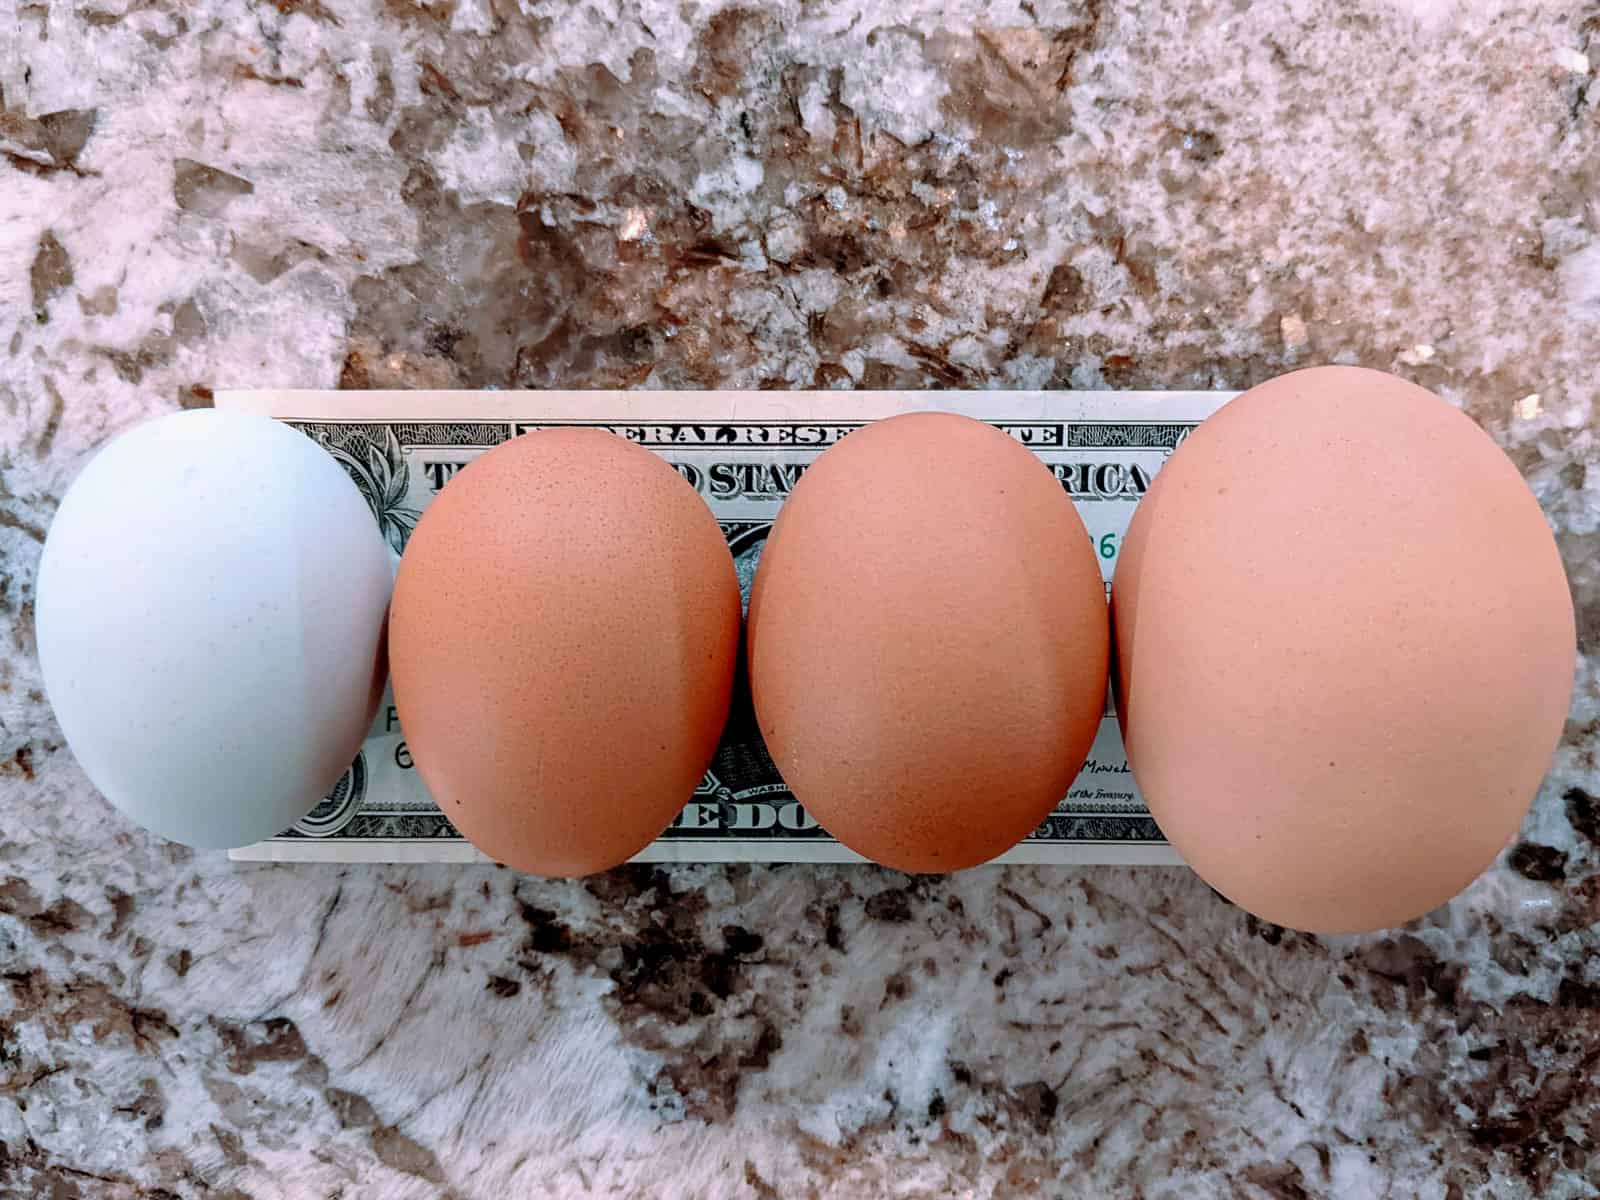 4 Varying backyard chicken eggs shown on top of a dollar bill to show size differences